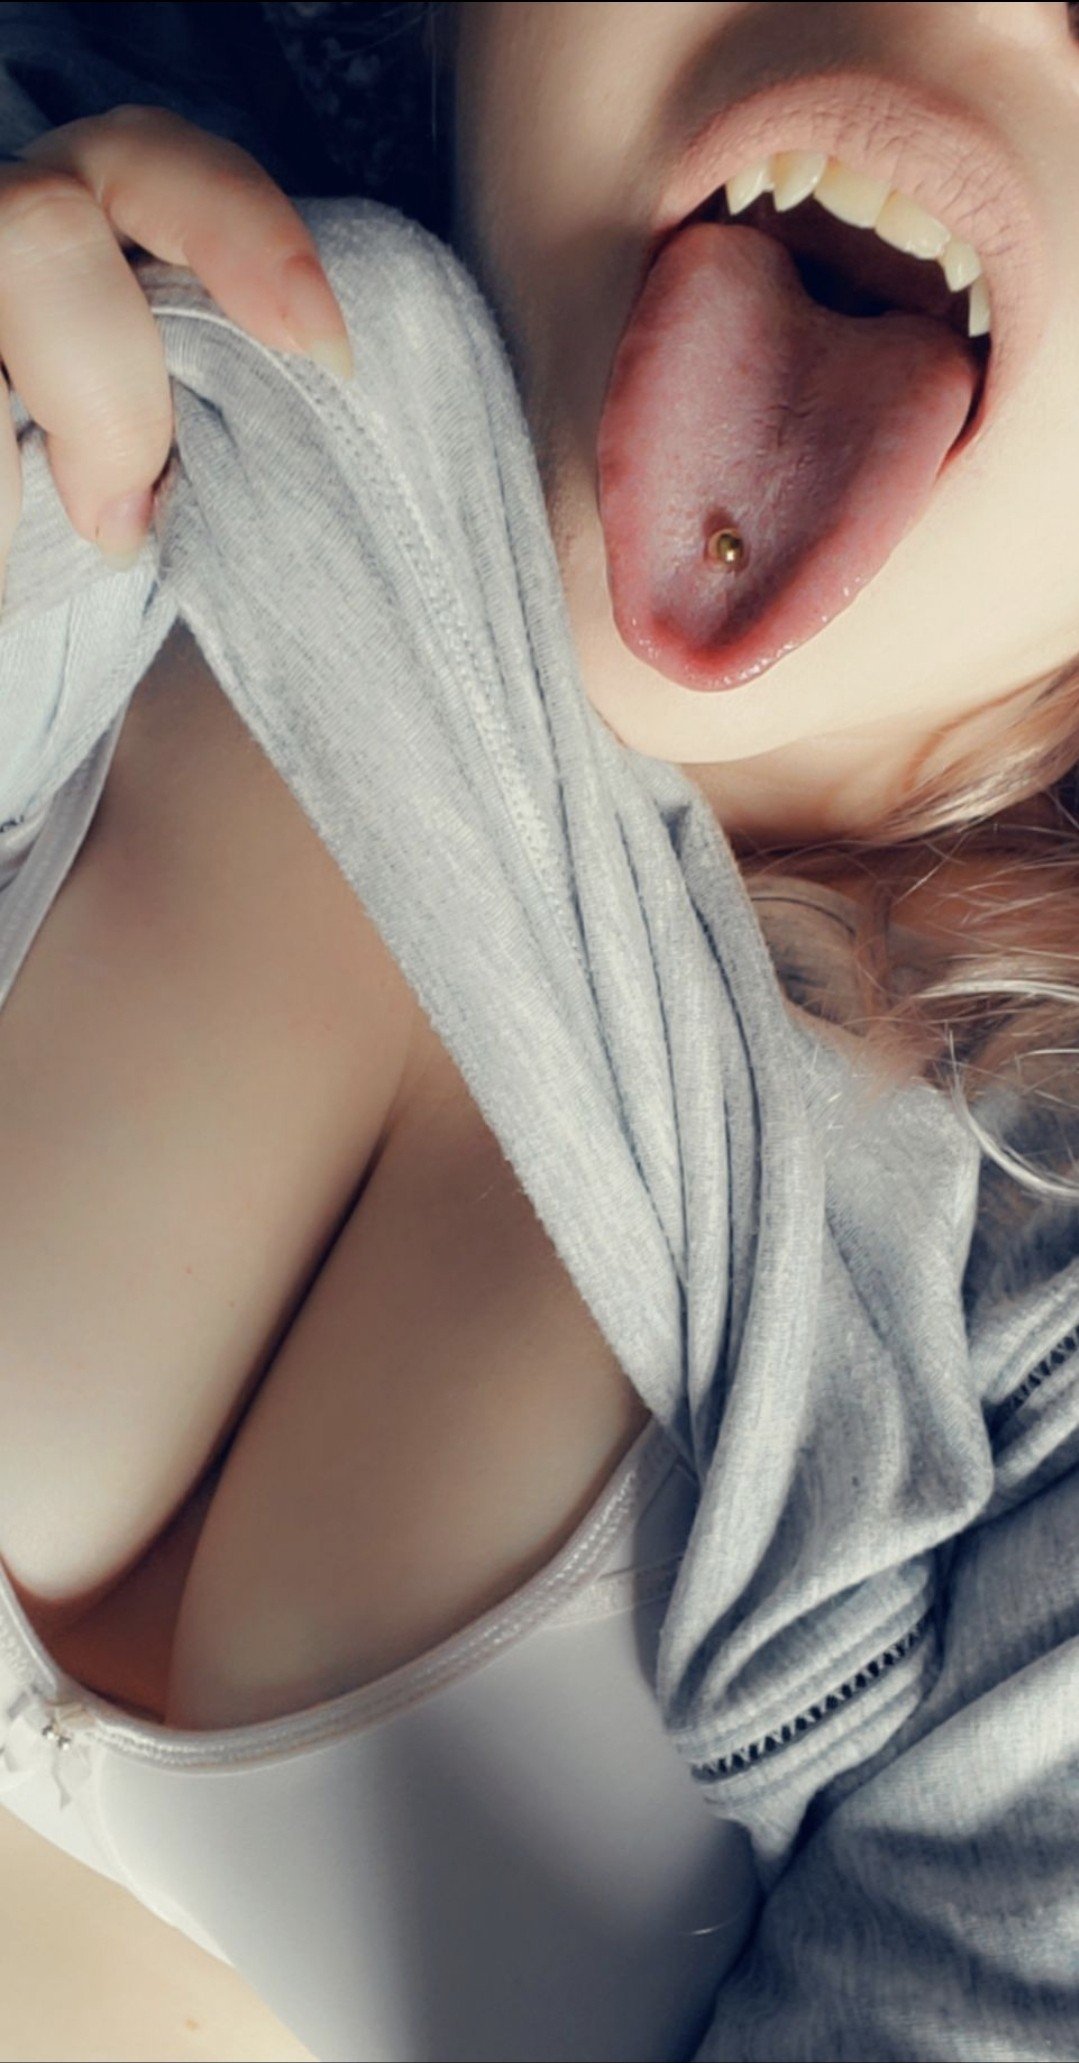 Photo by KieraMoon with the username @KieraMoon,  January 28, 2020 at 6:06 AM. The post is about the topic Tongues, Mouths and Fingers to Pleasure Service! and the text says 'give a vampire a chance, will ya? i dont bite...hard'